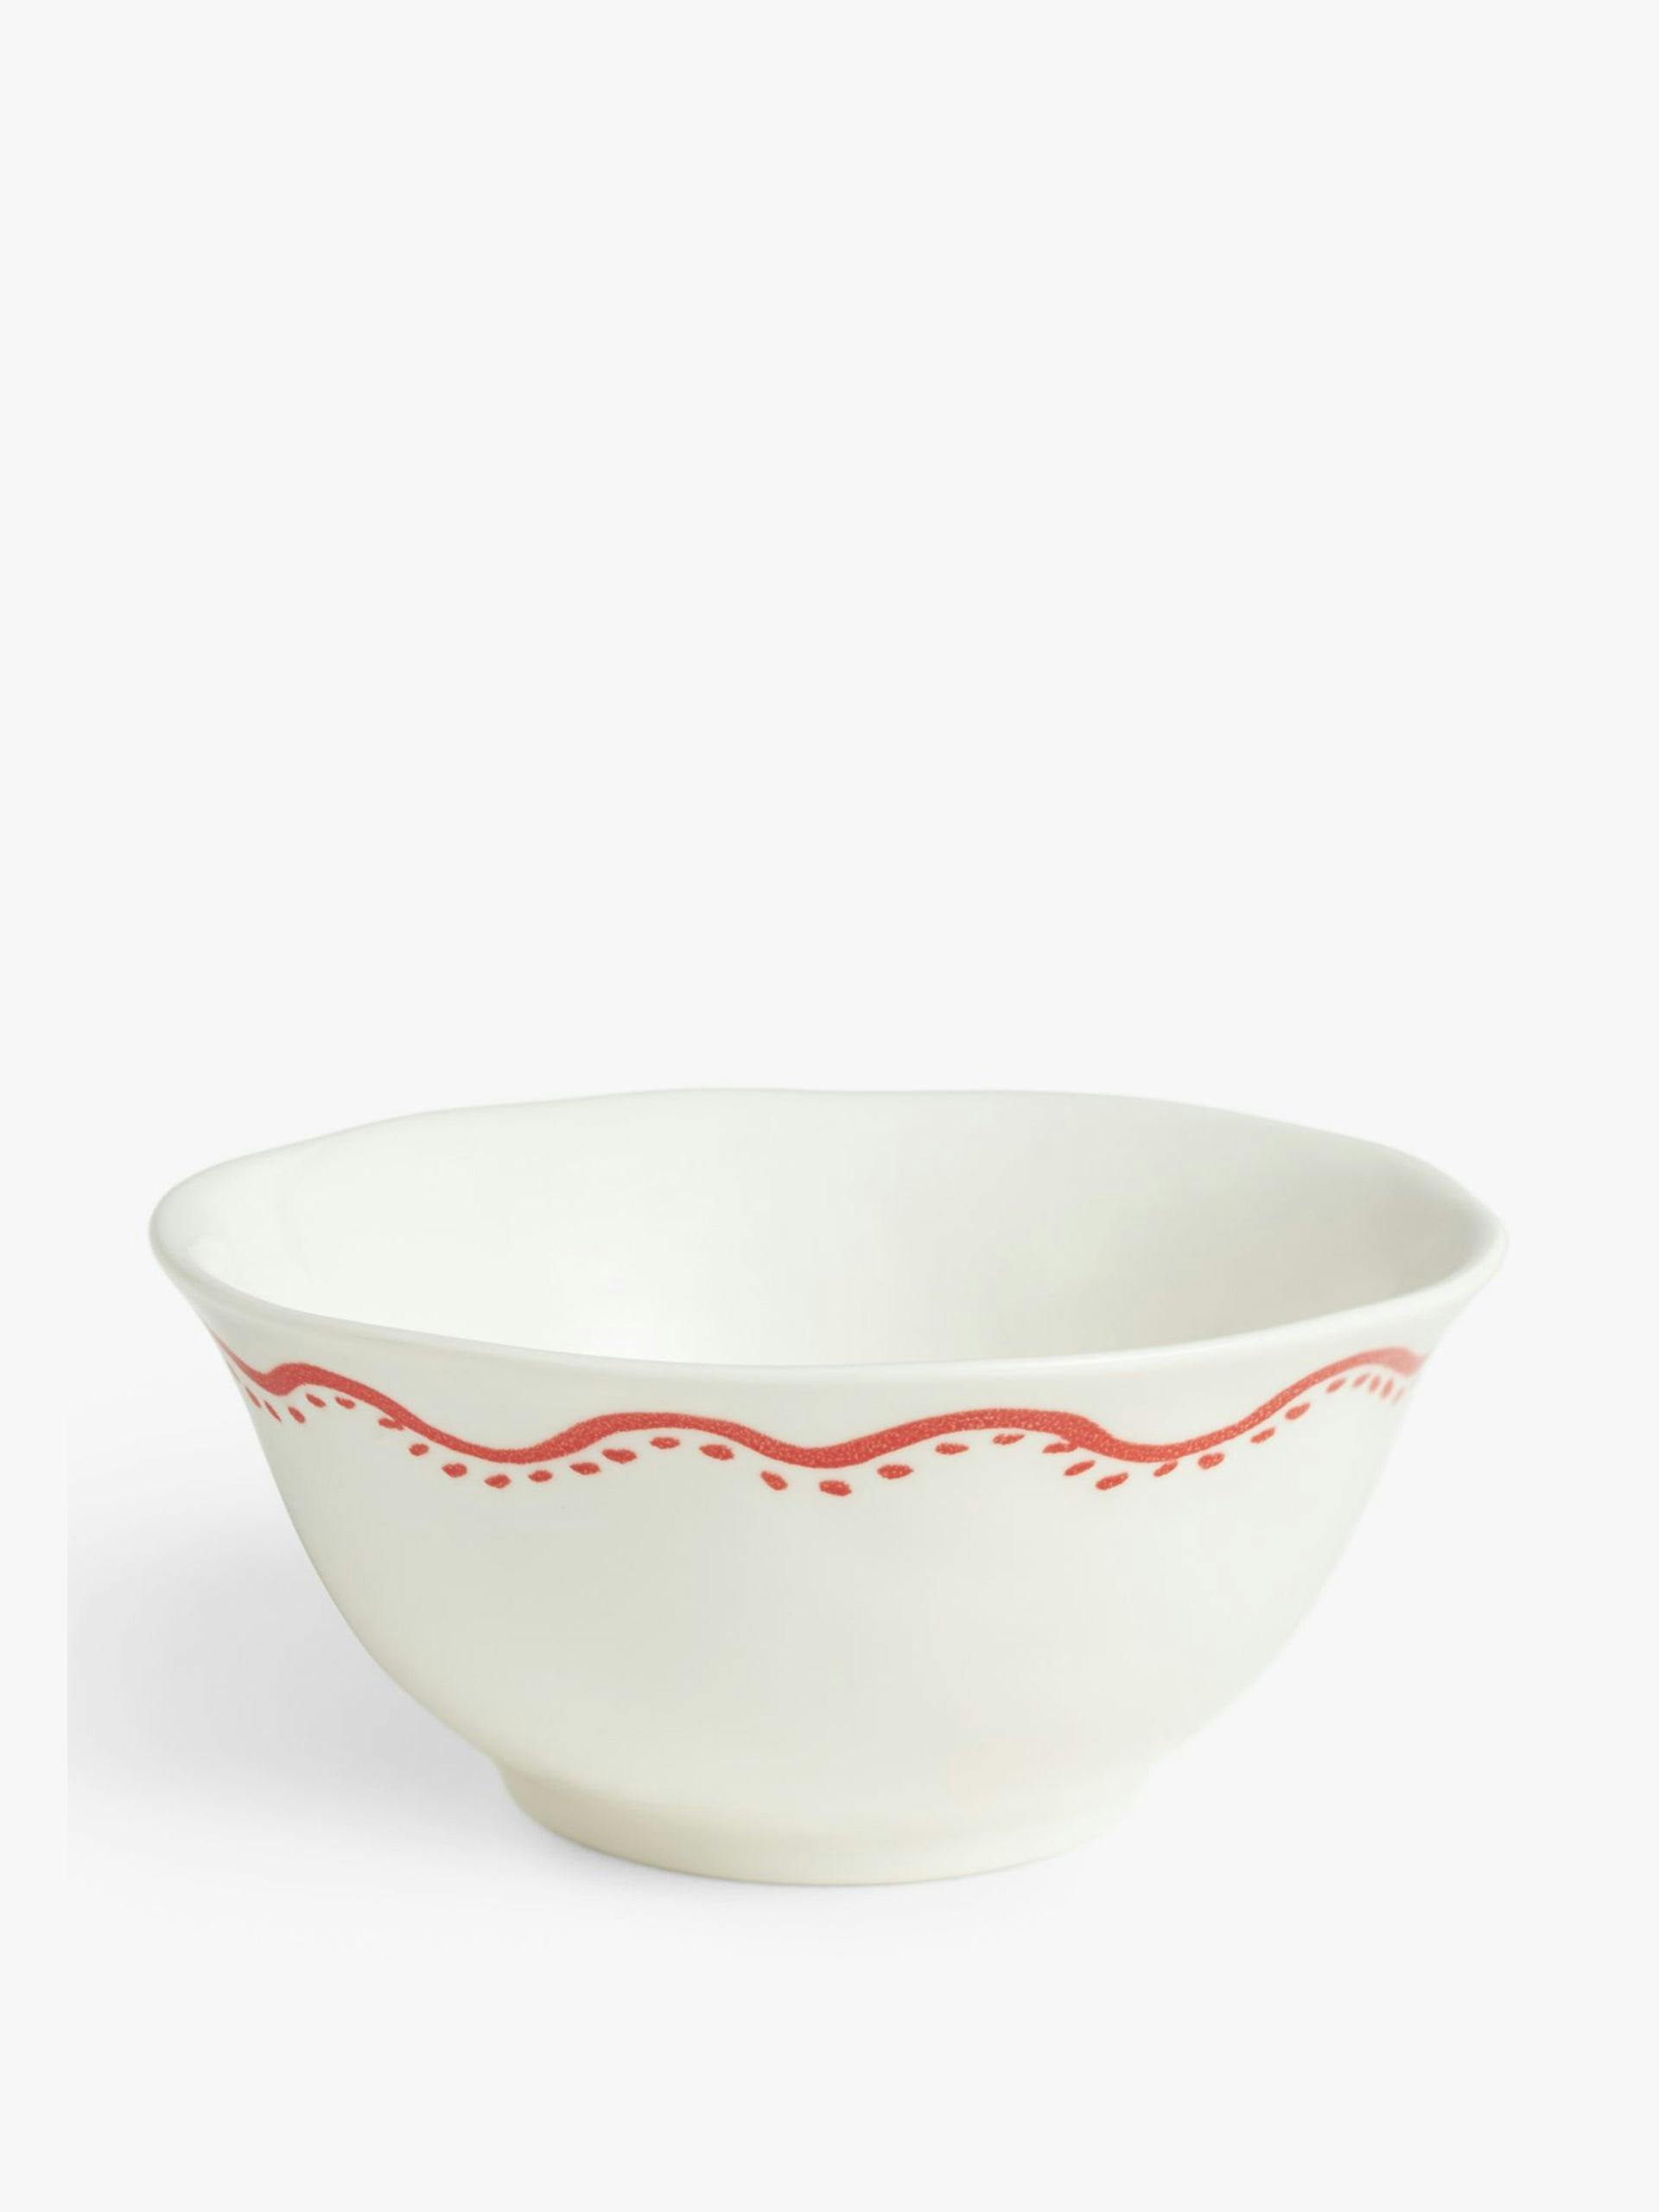 Fine china cereal bowl